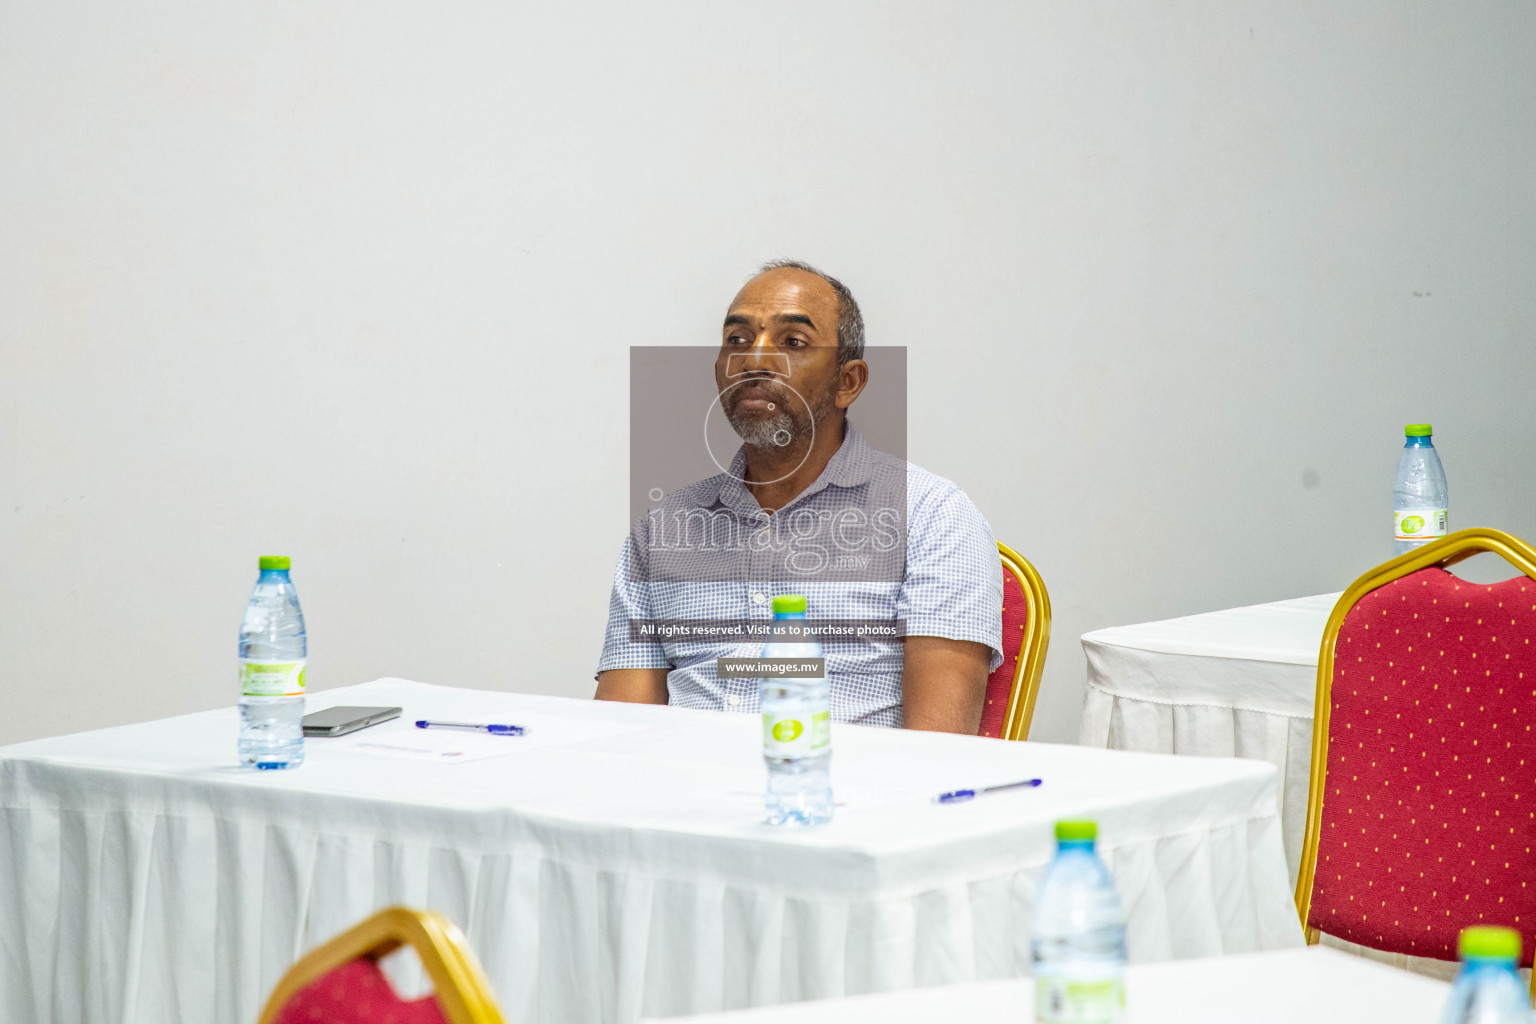 Annual general meeting of Athletics association of maldives held in 18th April 2022 photos by Nausham Waheed